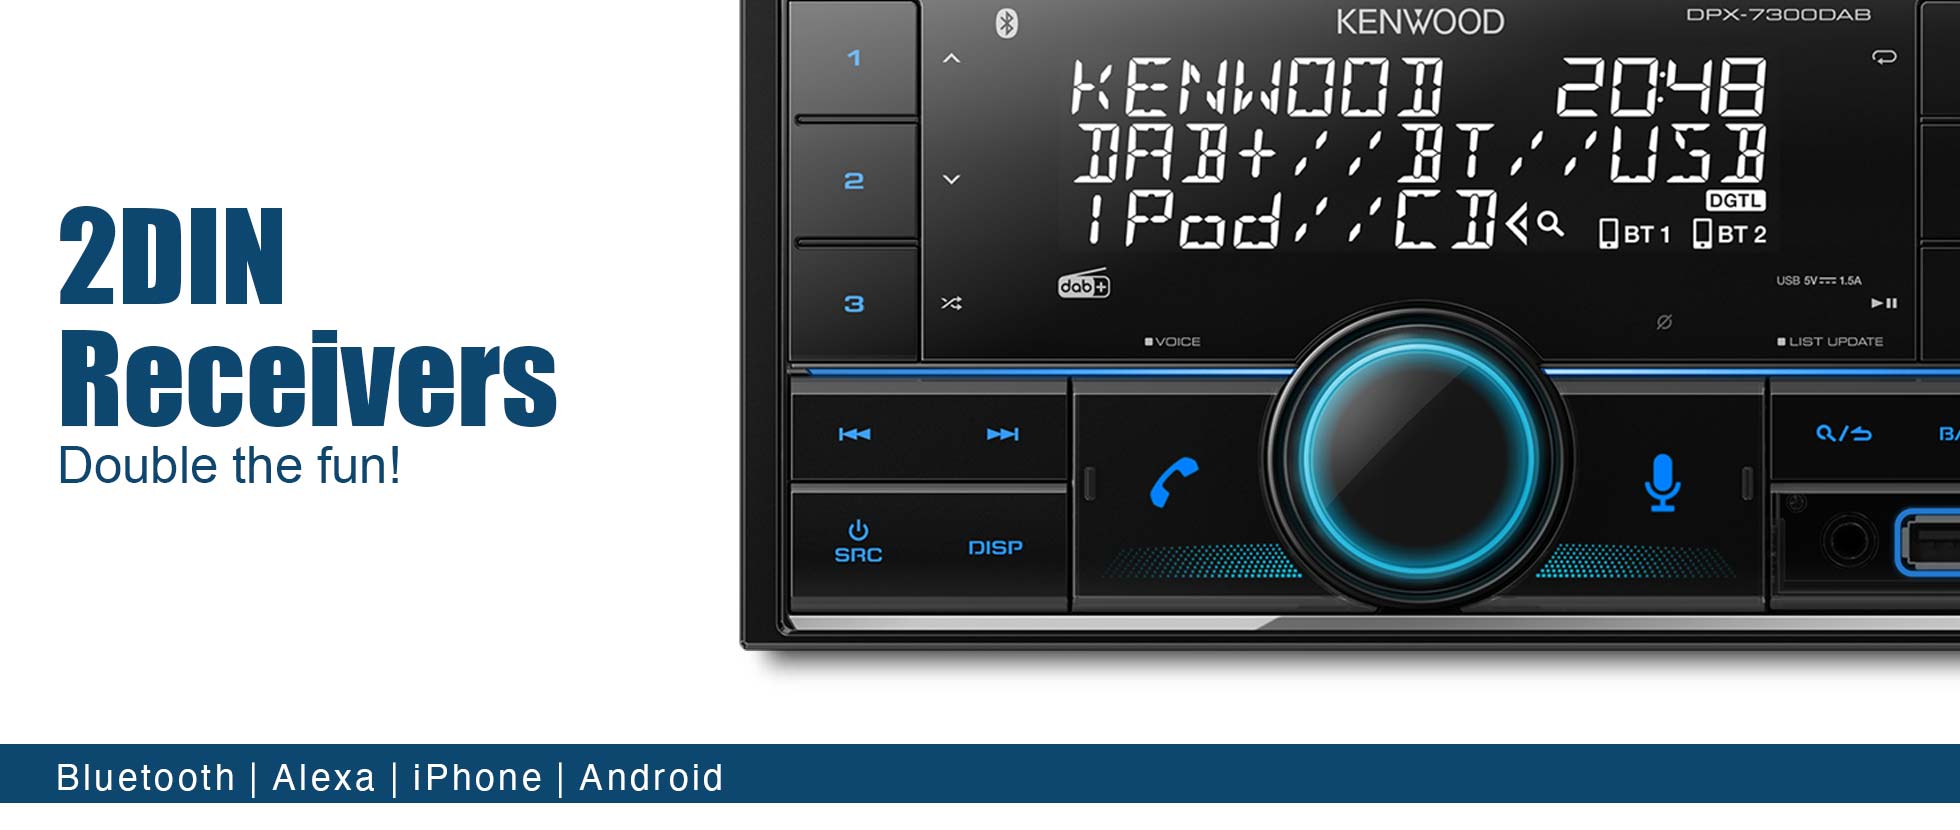 2DIN Car Stereo, Double-DIN In-Car, Double-DIN Car Stereo • KENWOOD UK